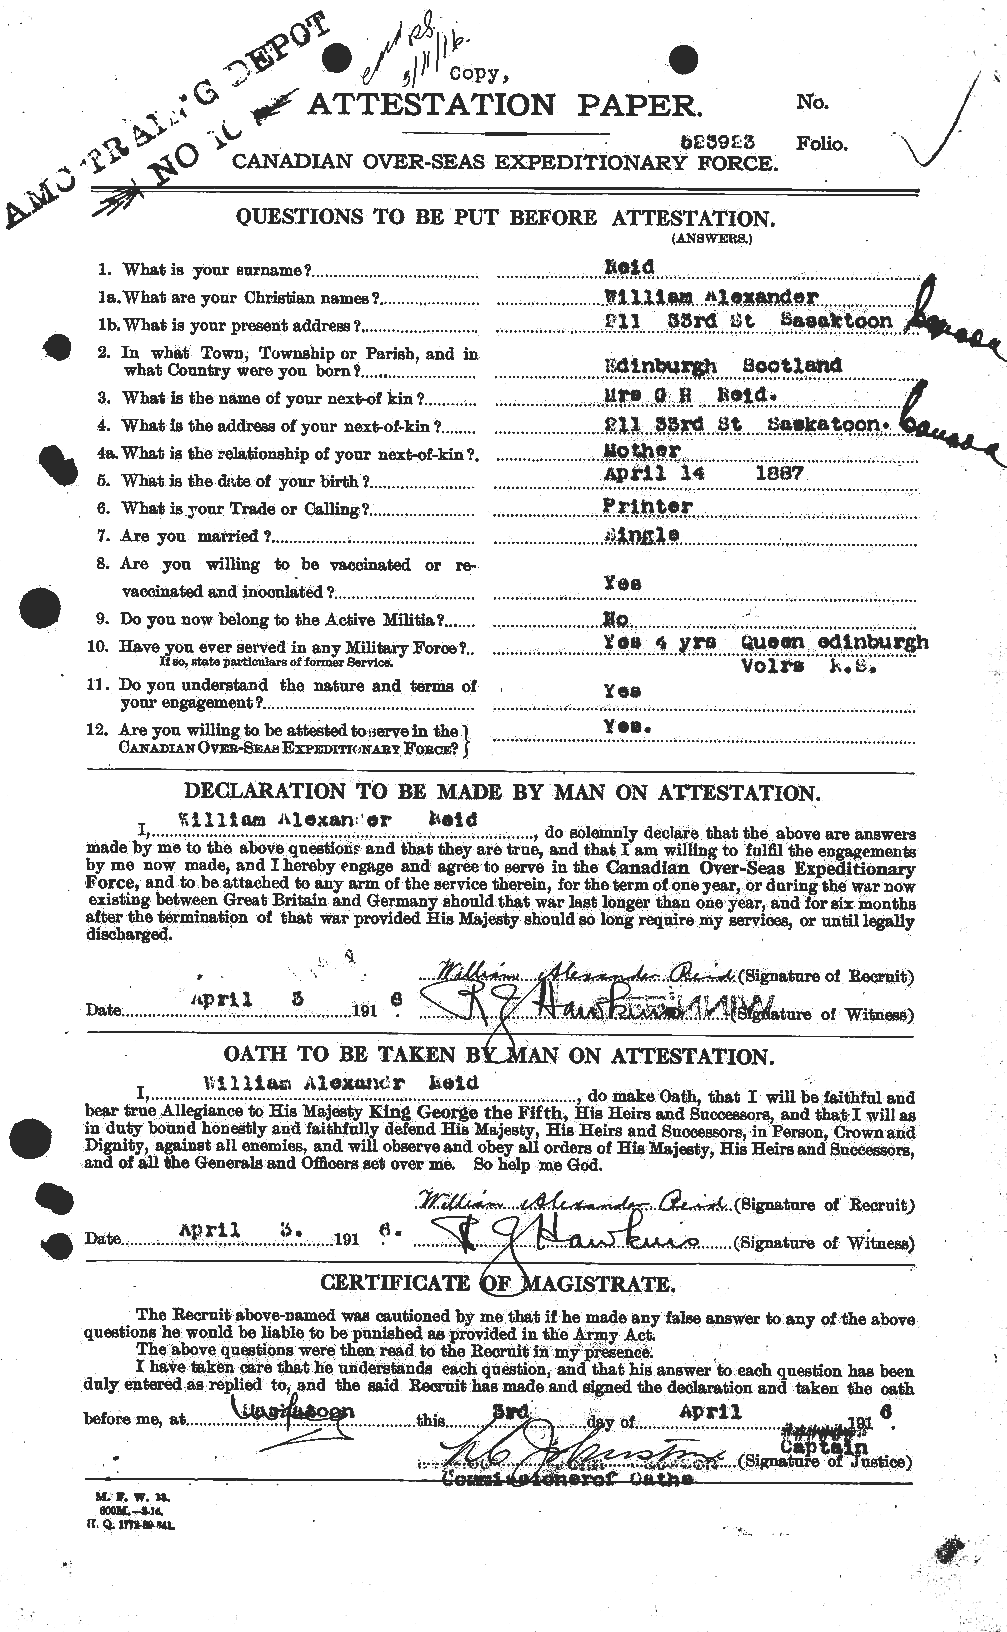 Personnel Records of the First World War - CEF 596956a